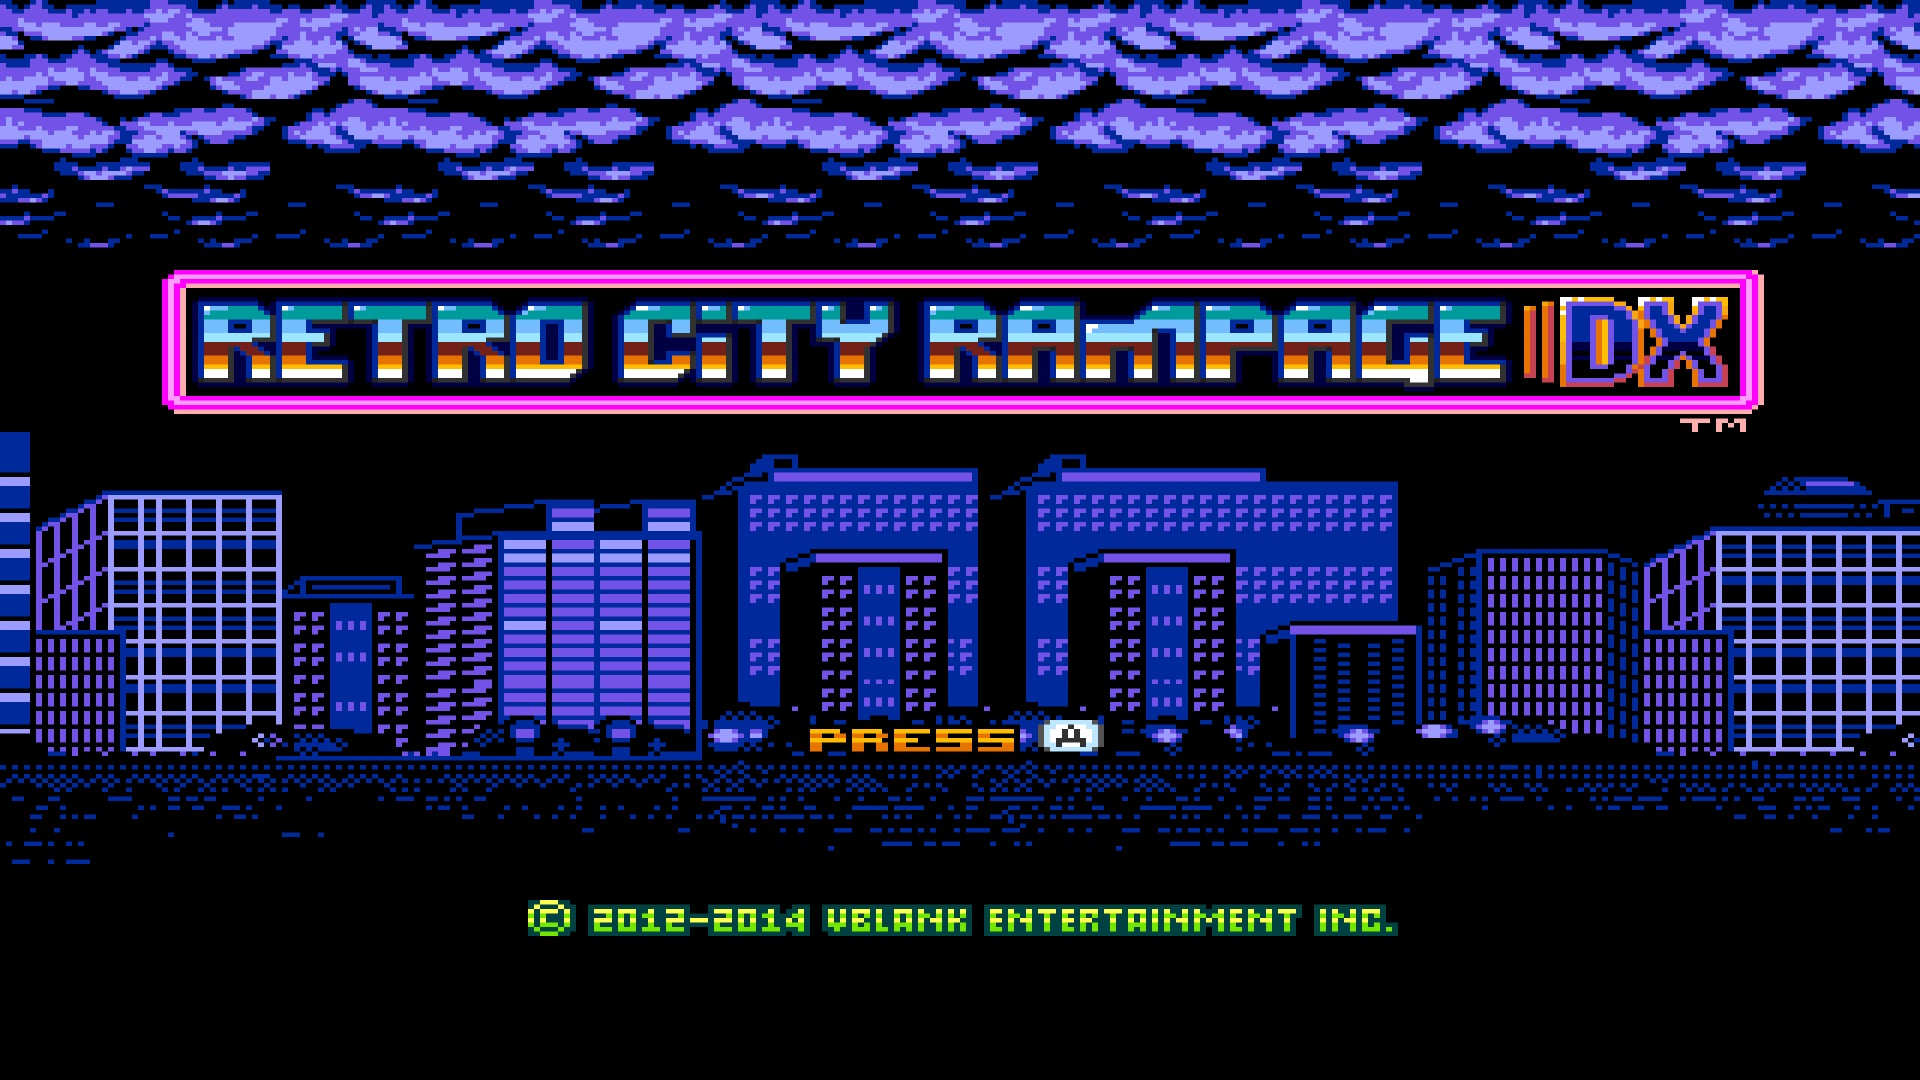 retro city rampage dx physical